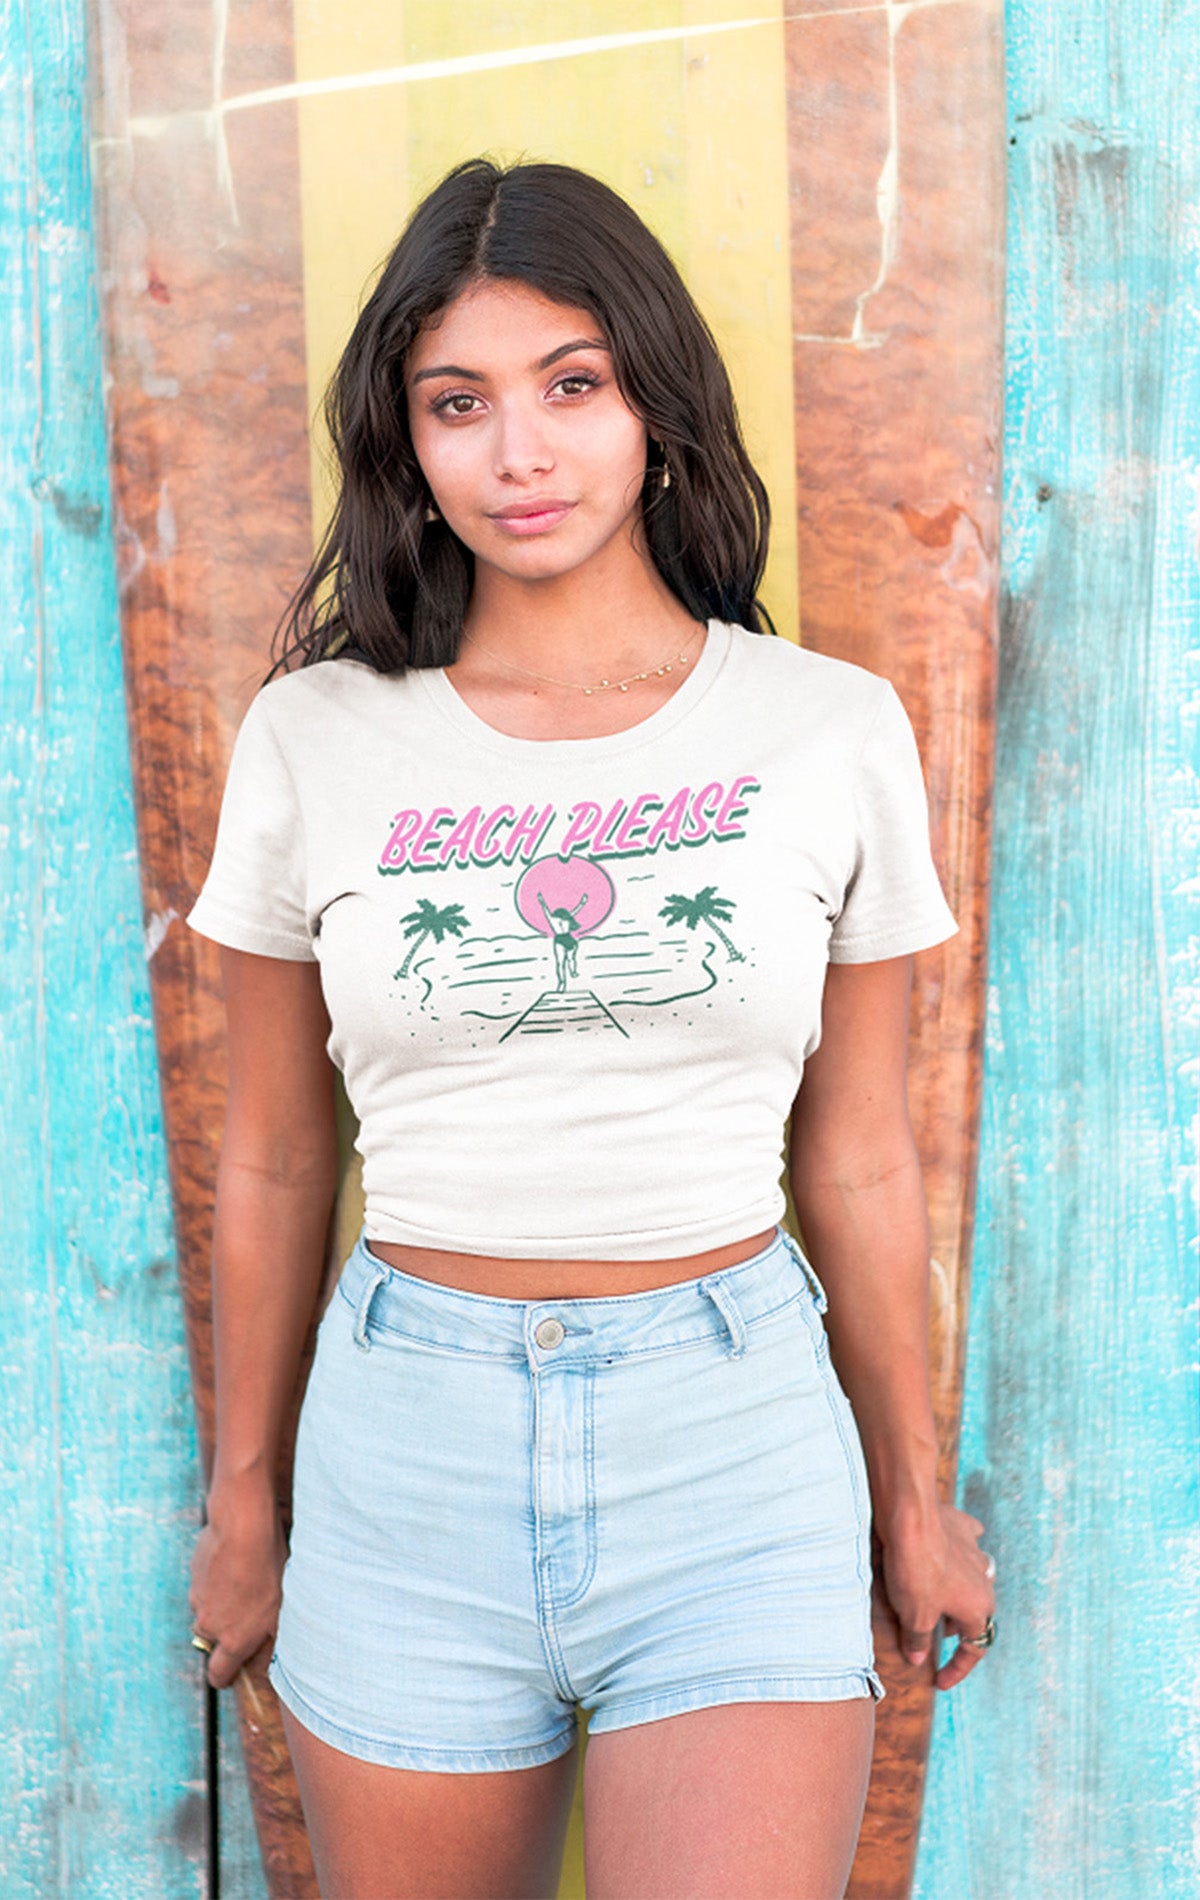 Beach Please Goan Clothing and crop top for casual beach wear in summers